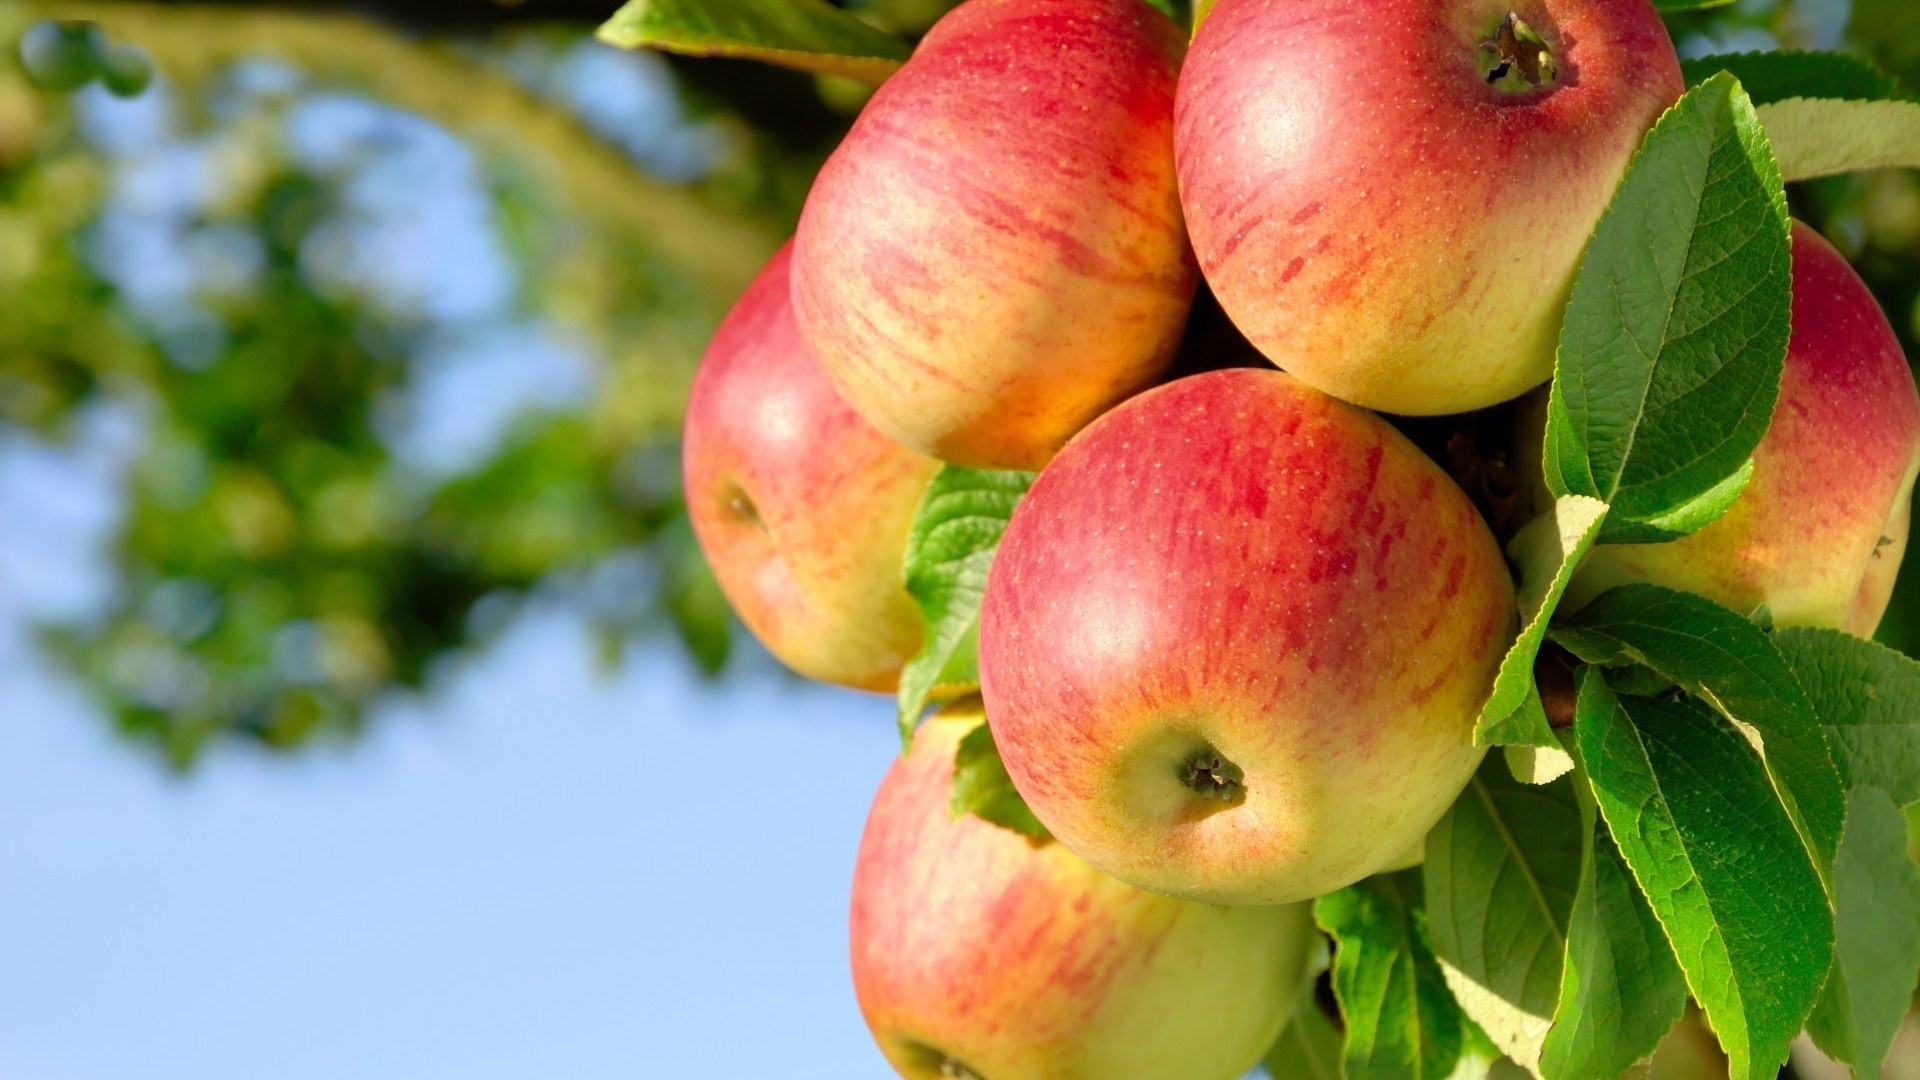 hd wallpapers free download,fruit,plant,flowering plant,apple,peach